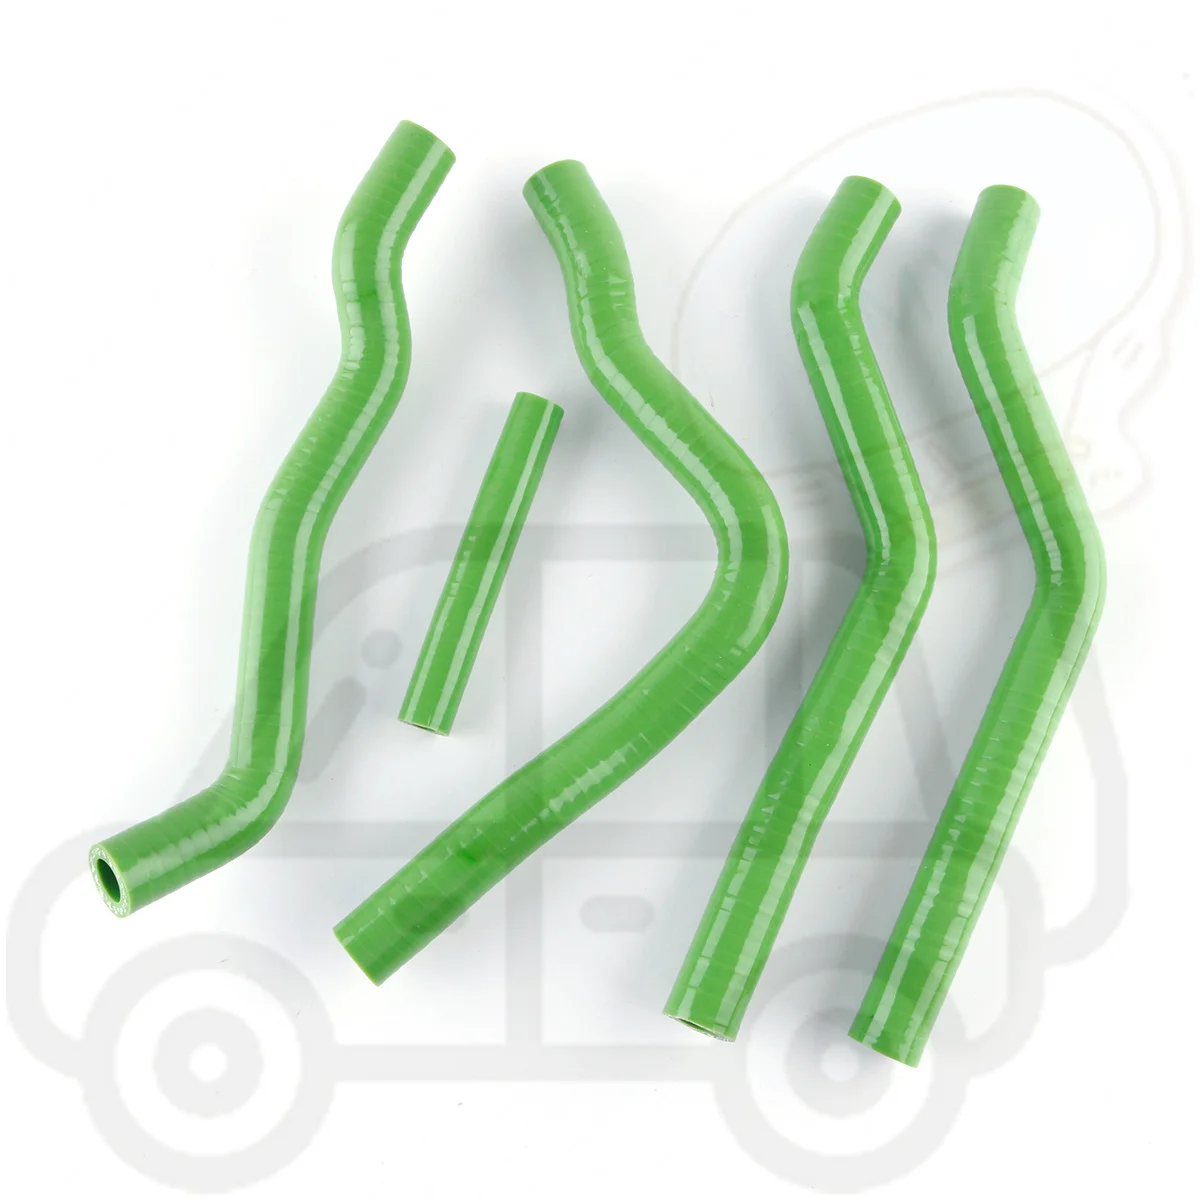 

5pcs Silicone radiator Coolant hose For 1990-1993 Kawasaki KX125 KX 125 Replacement Parts 1991 1992 Upper and Lower